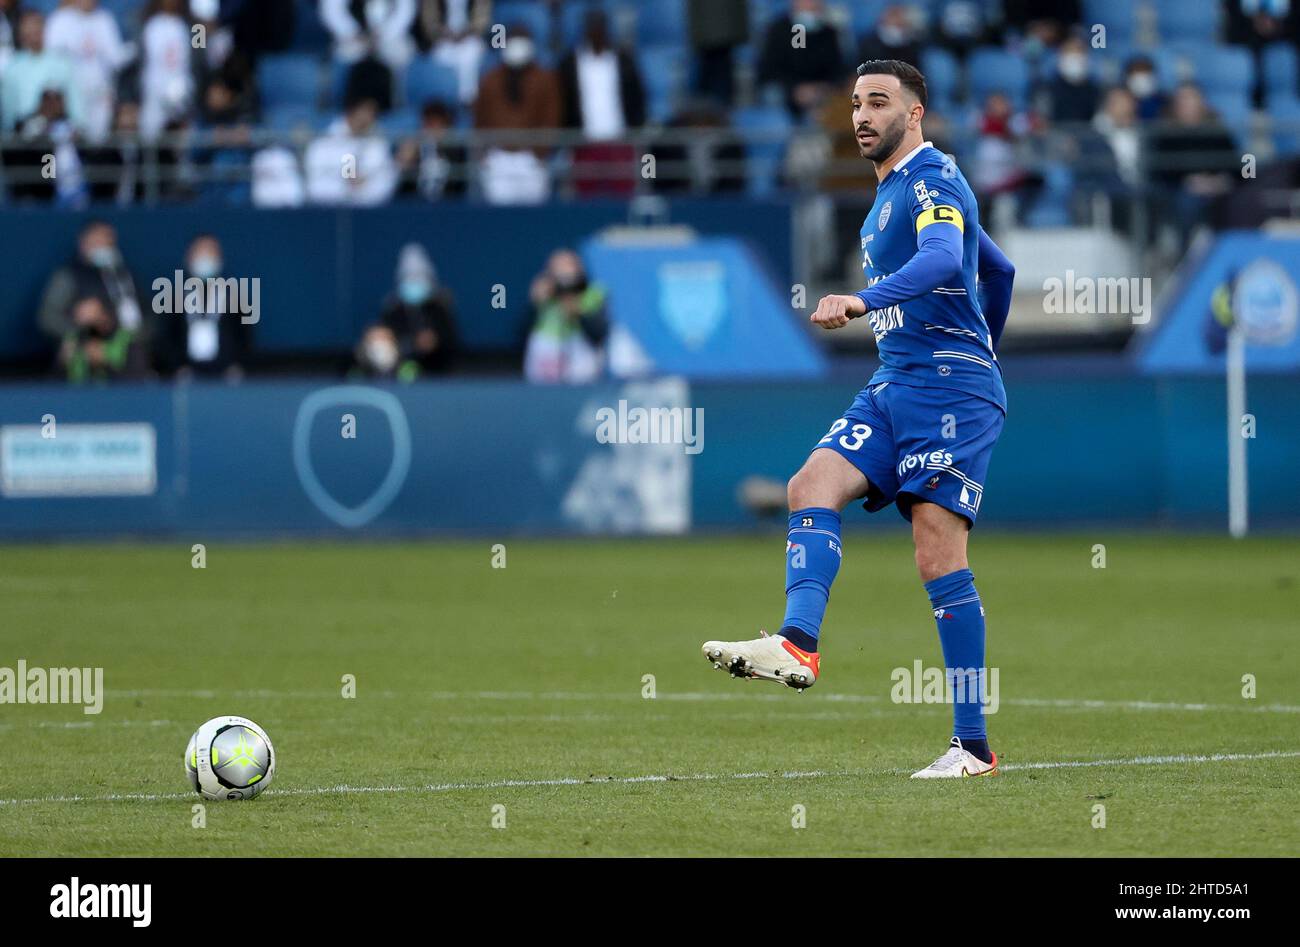 Troyes, France, February 27, 2022, Adil Rami of Troyes during the French  championship Ligue 1 football match between ESTAC Troyes and Olympique de  Marseille (OM) on February 27, 2022 at Stade de